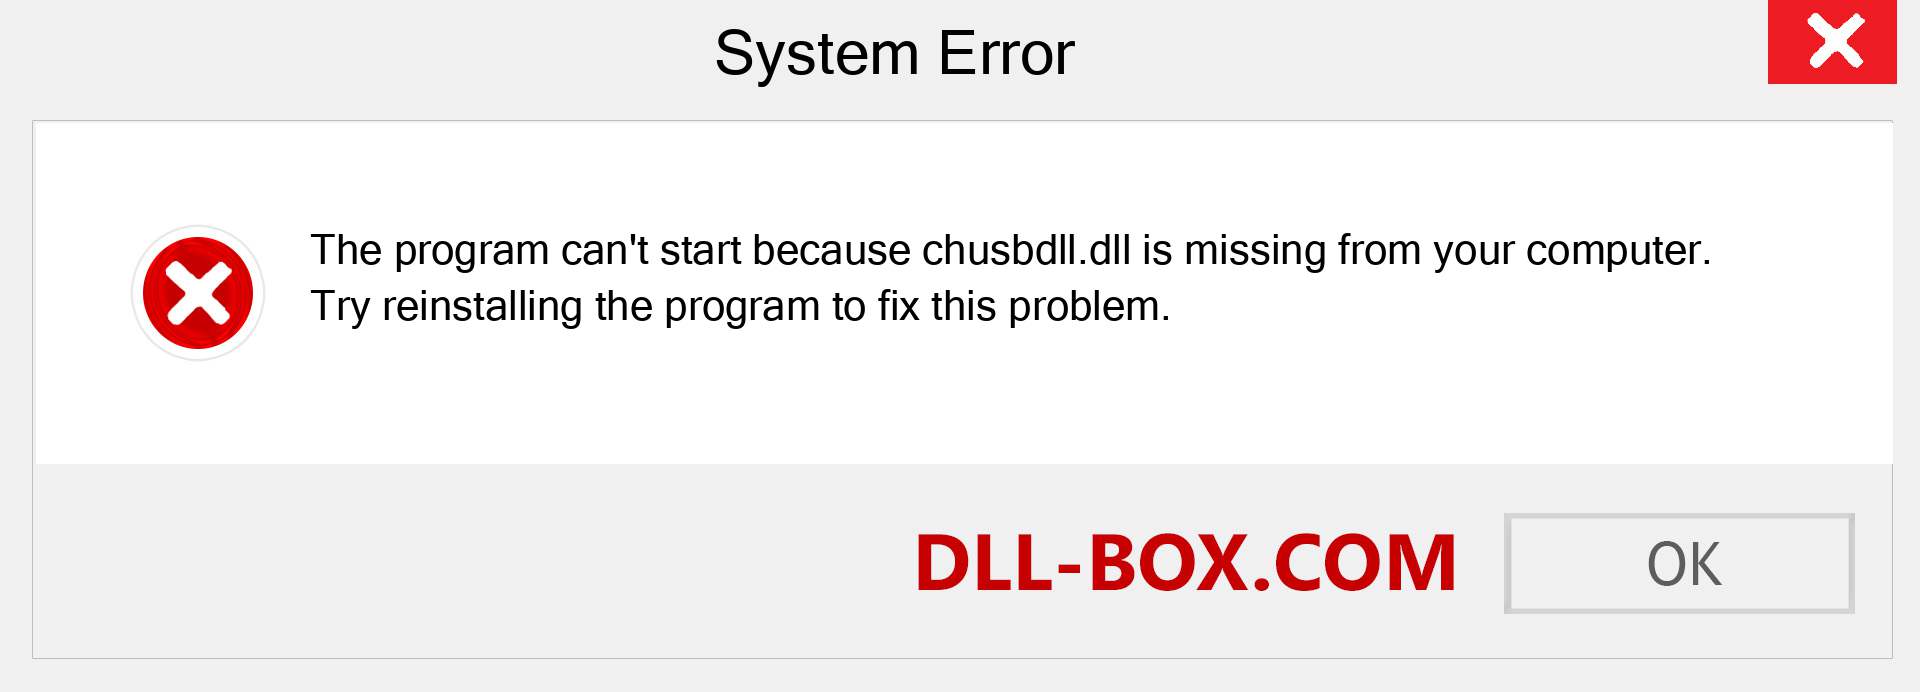  chusbdll.dll file is missing?. Download for Windows 7, 8, 10 - Fix  chusbdll dll Missing Error on Windows, photos, images